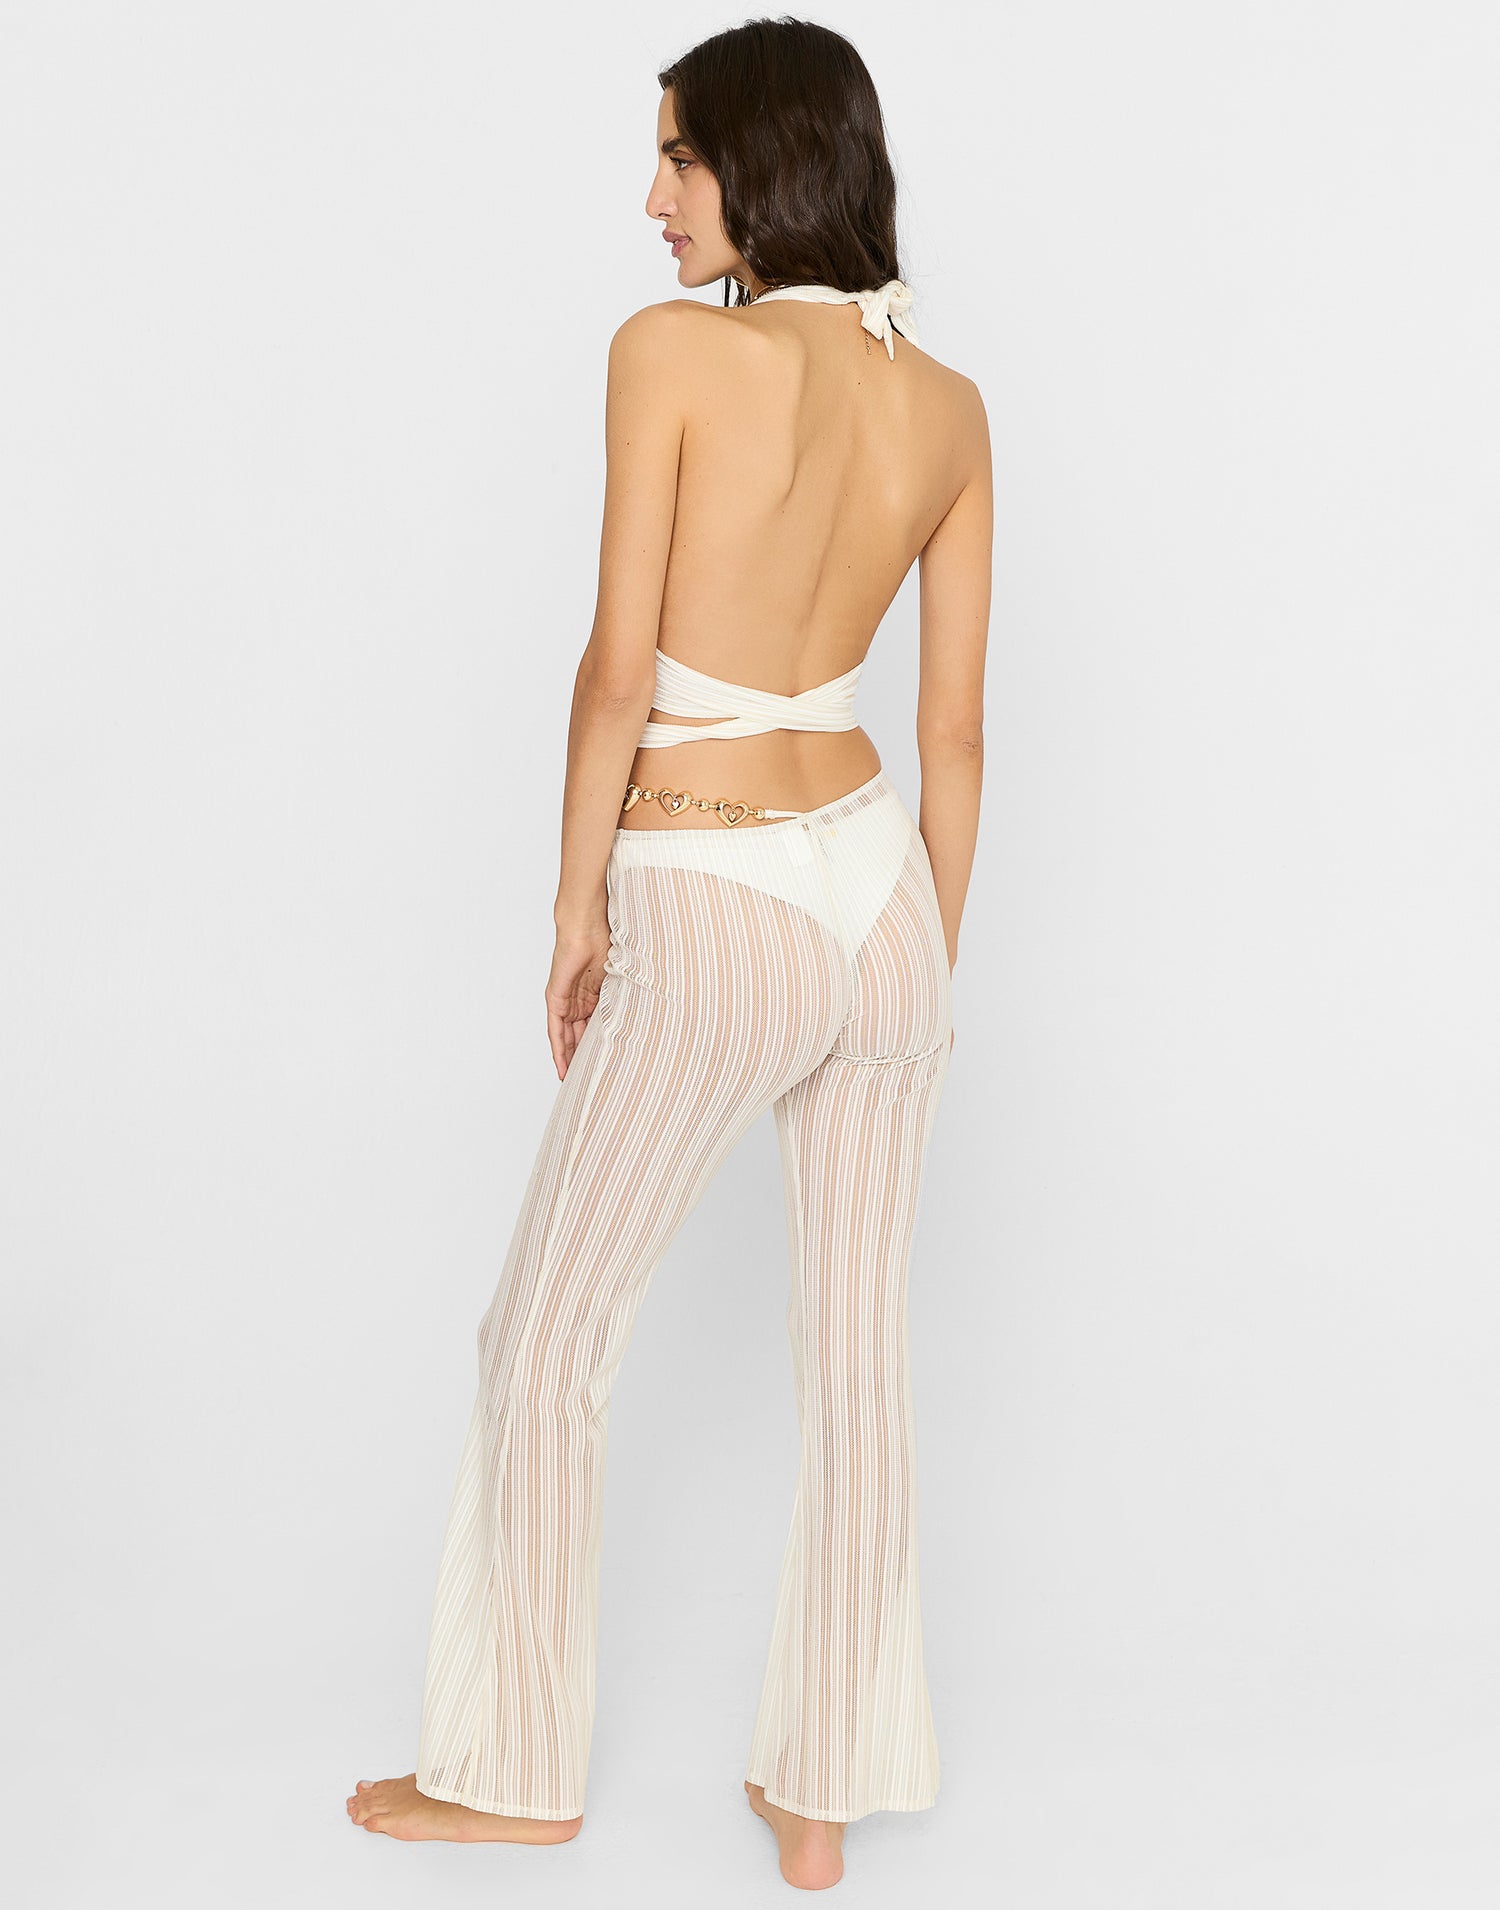 Saddie Mesh Wrap Top Cover Up in White/Gold - Back View